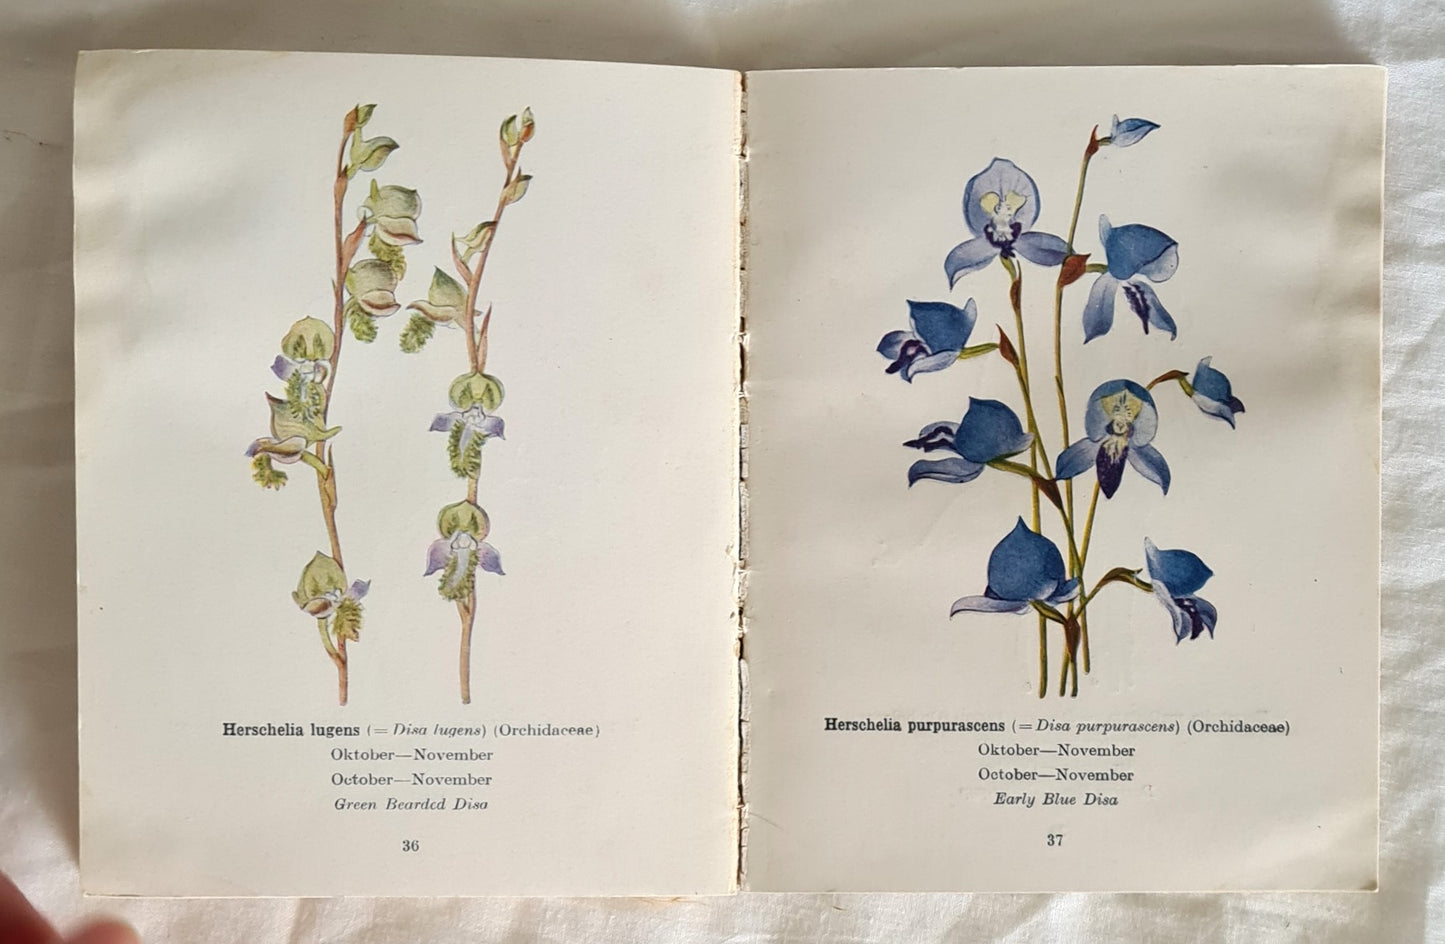 Protected Wild Flowers of the Cape Province: Part I